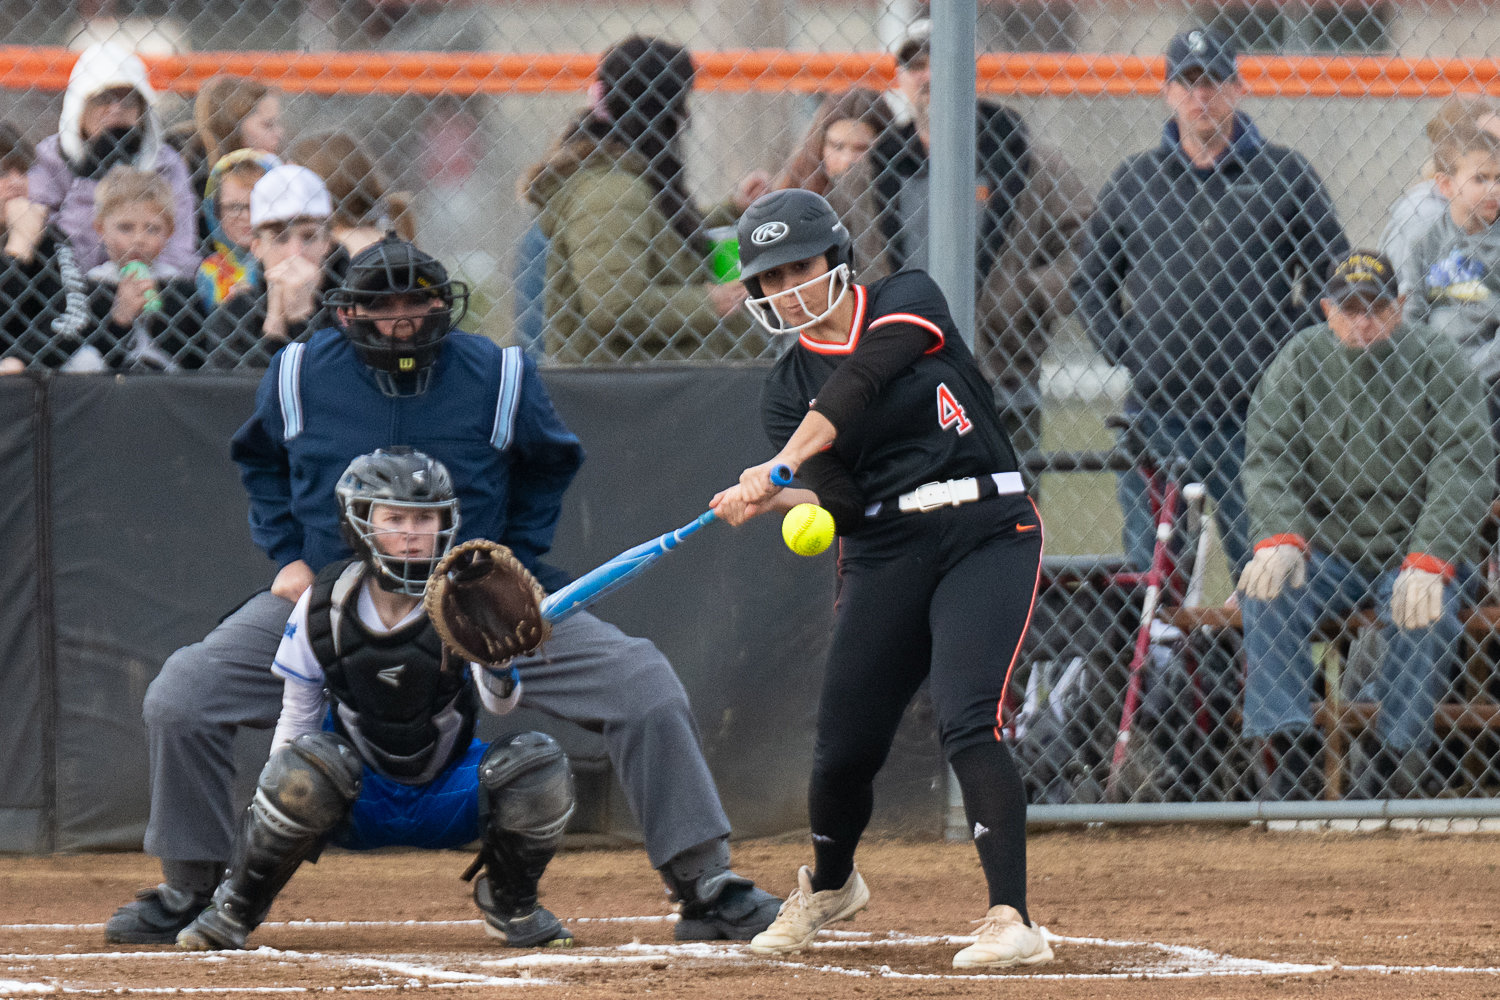 Dani Tupuola swings at a pitch during Napavine's game against Elma on March 20.